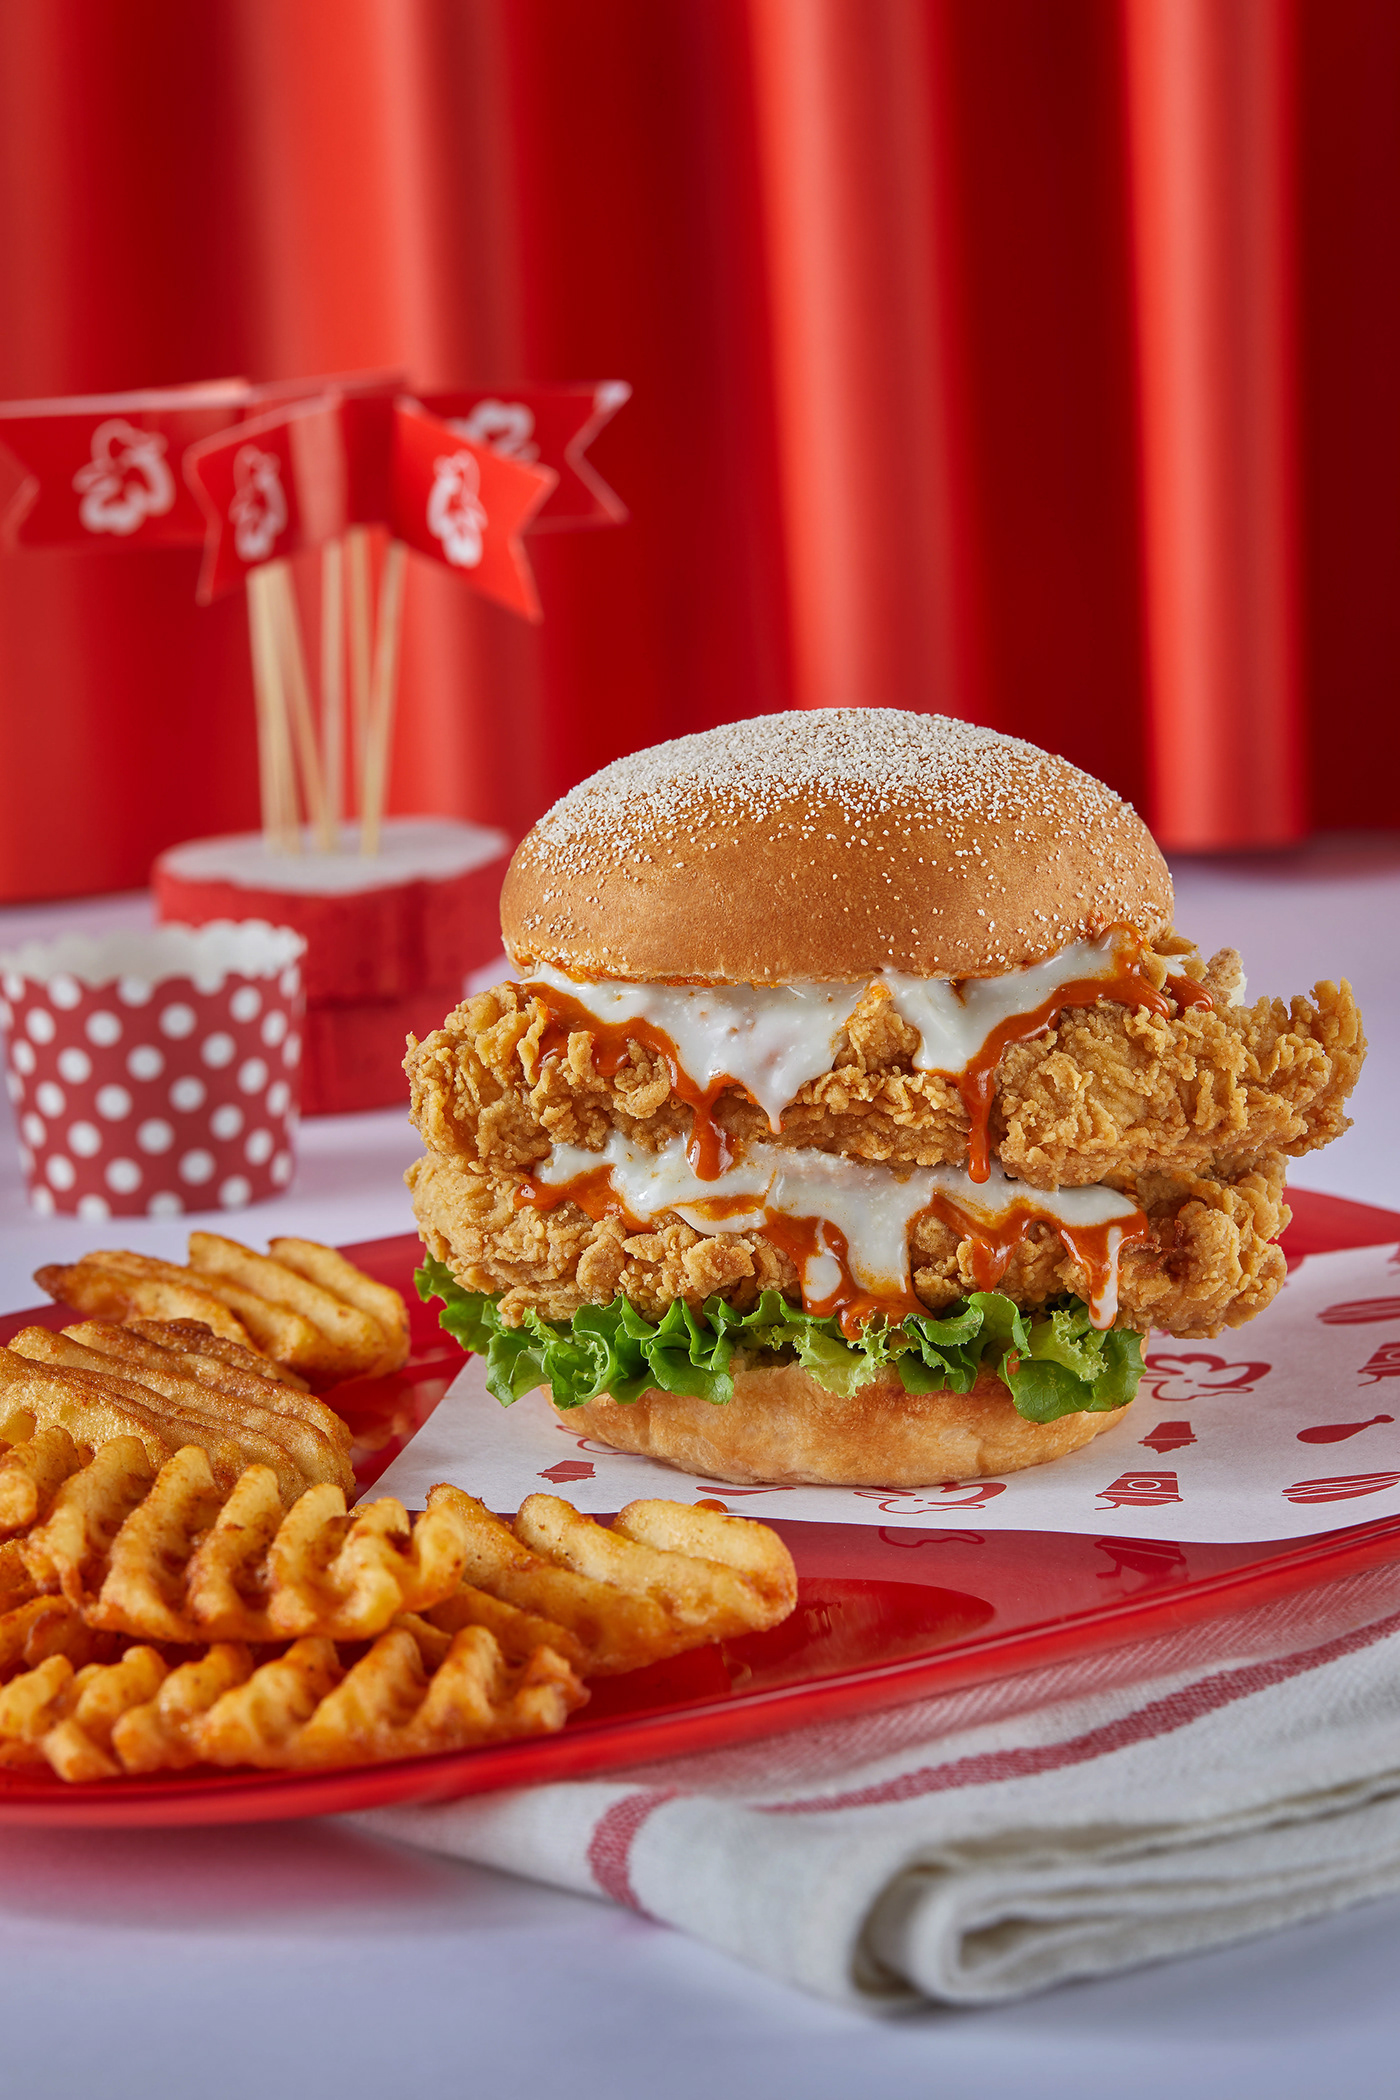 chicken friedchicken foodphotography foodstyling ArtDirection redcolor Sandwiches burger